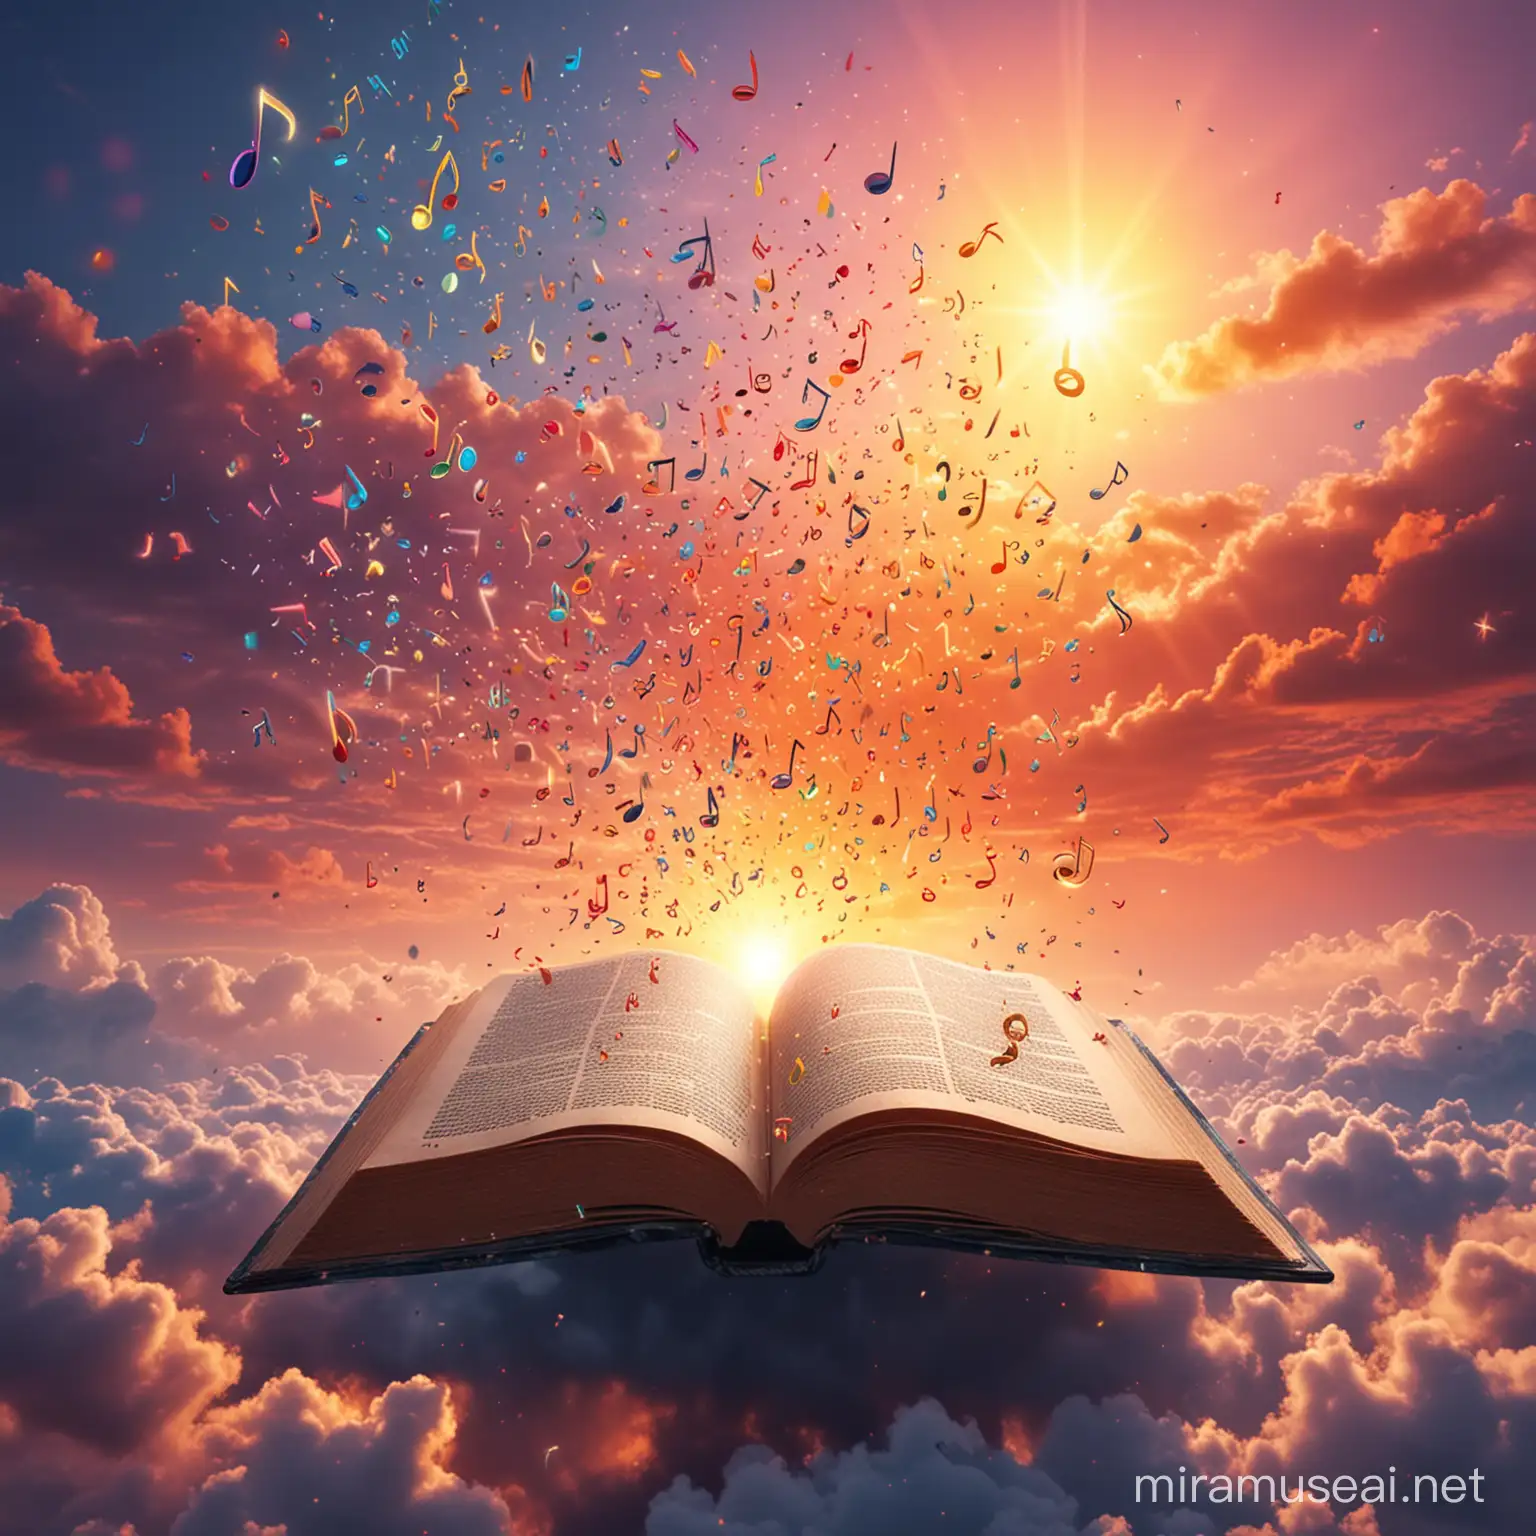 Vibrant Sunrise with Musical Notes Dancing from a Magical Book